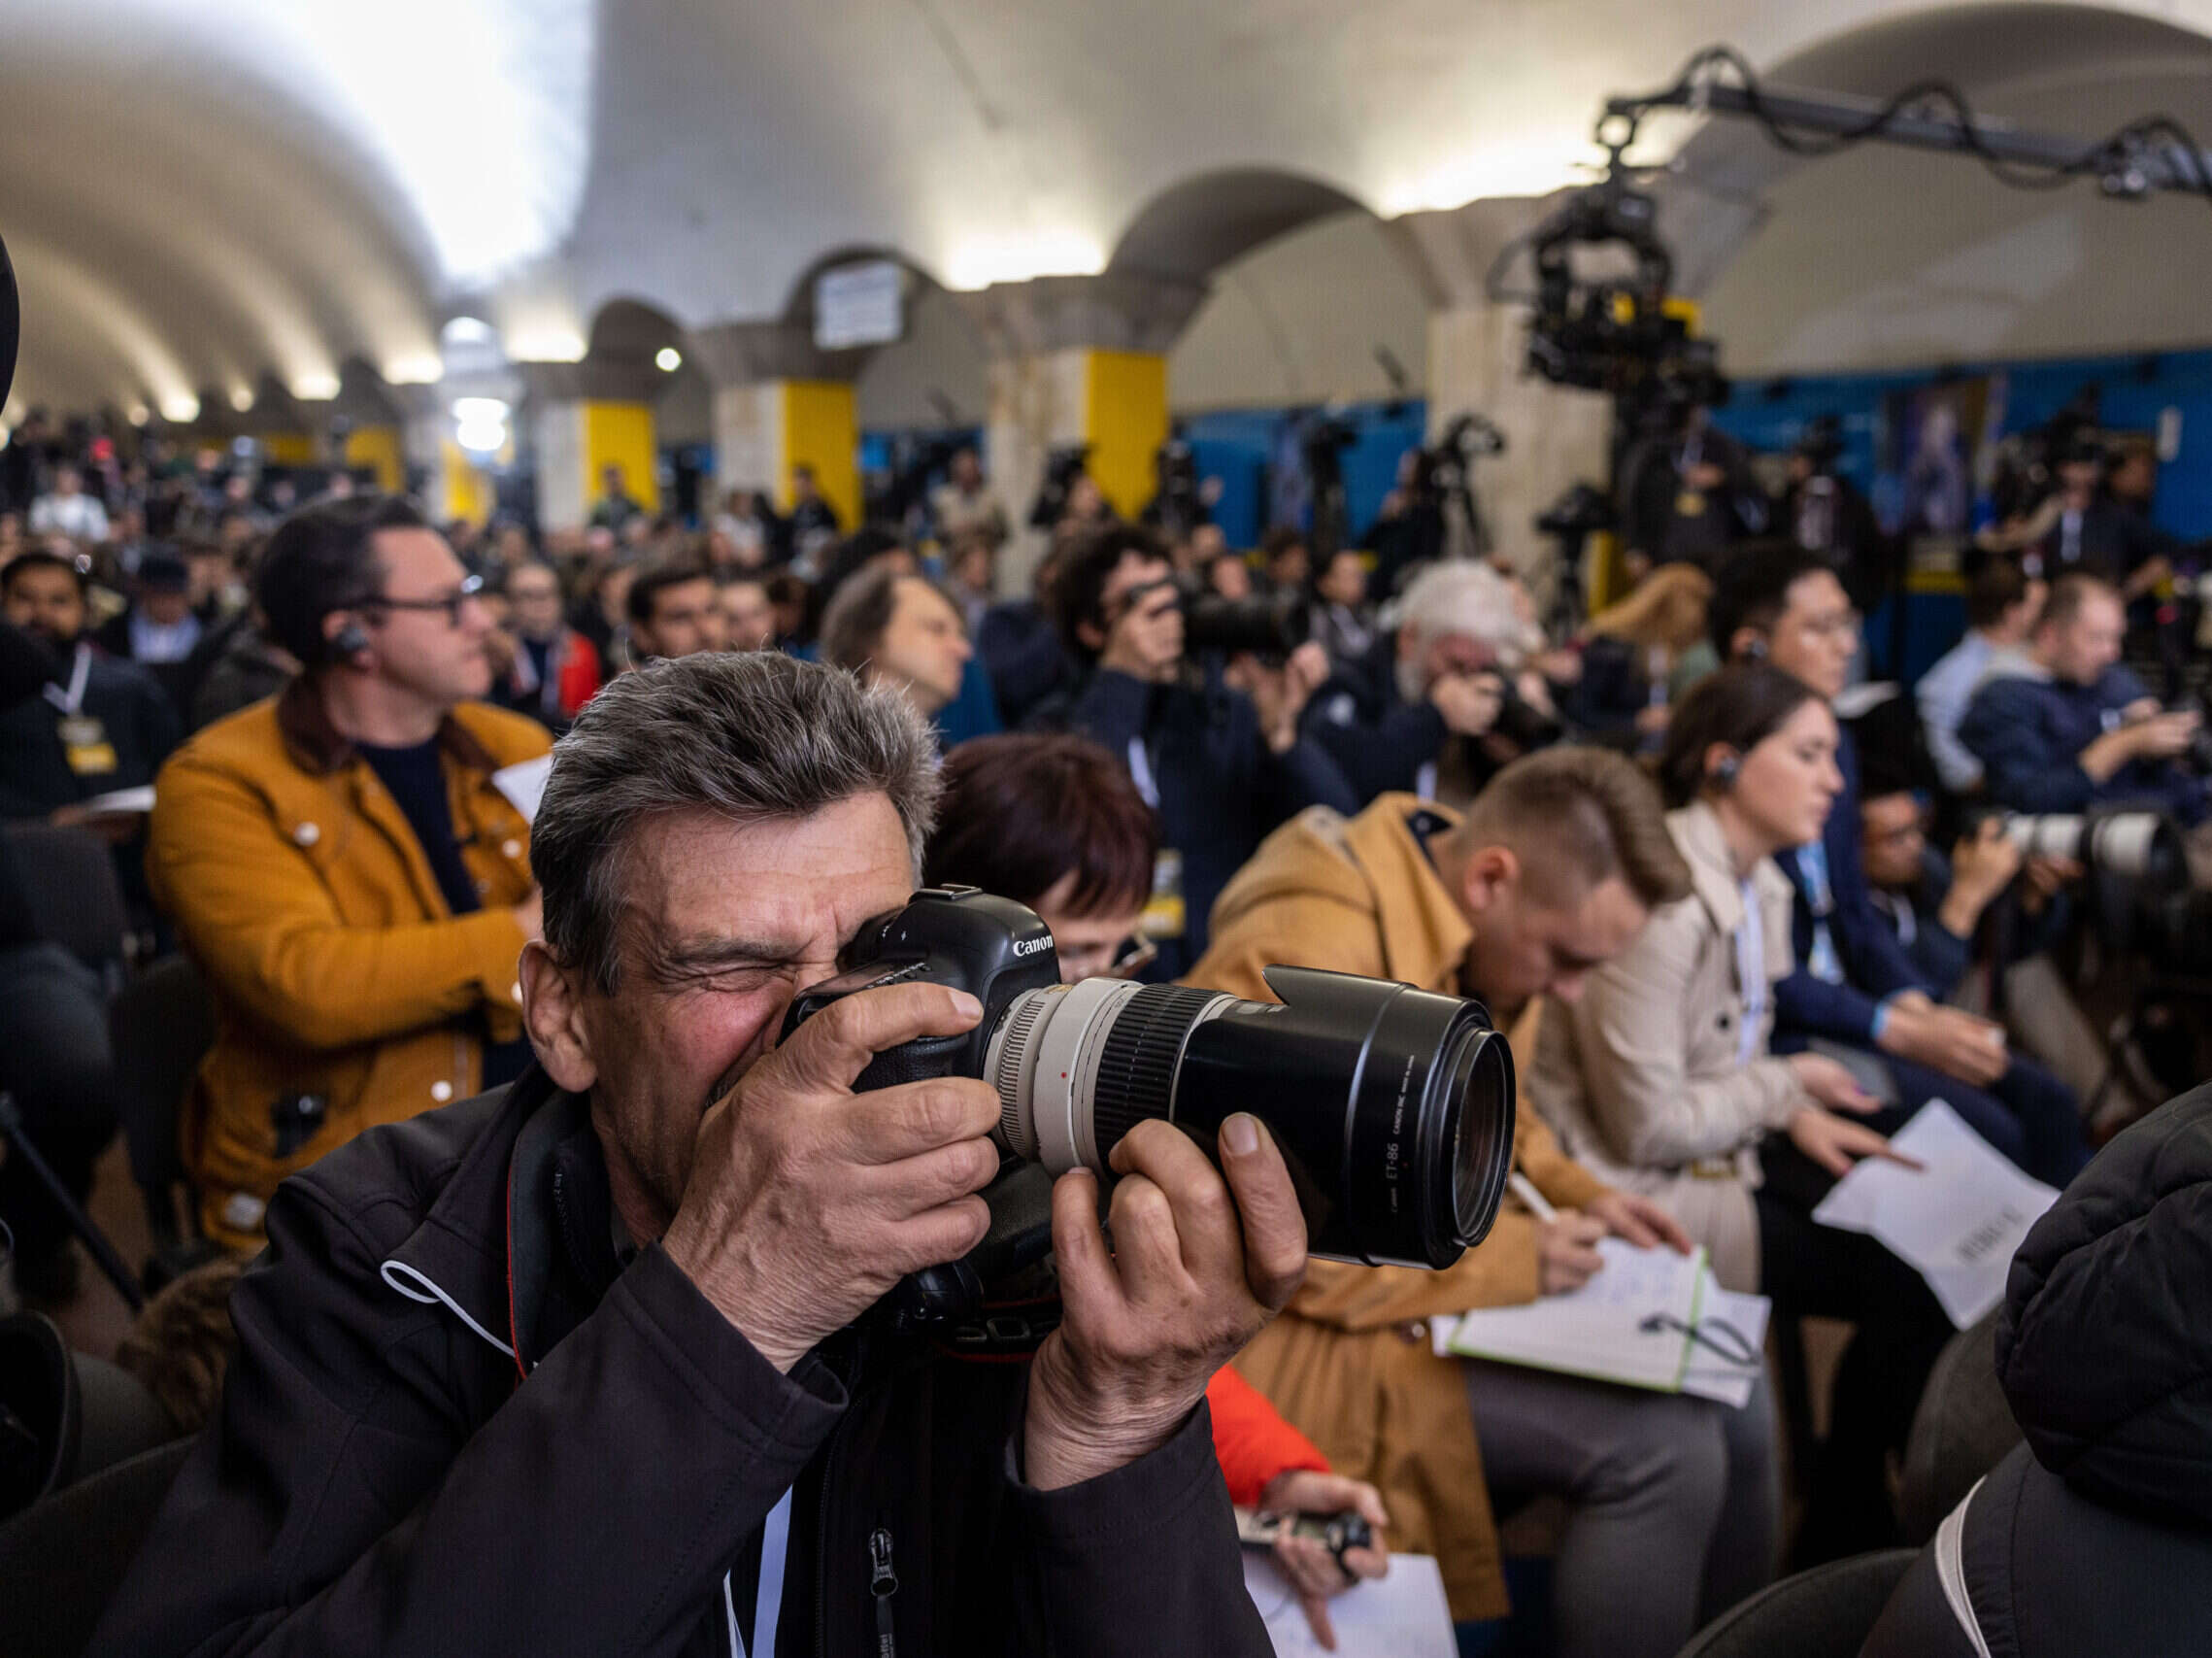 Ukraine double standards - a photographer in Ukraine takes a picture from within a large press pack